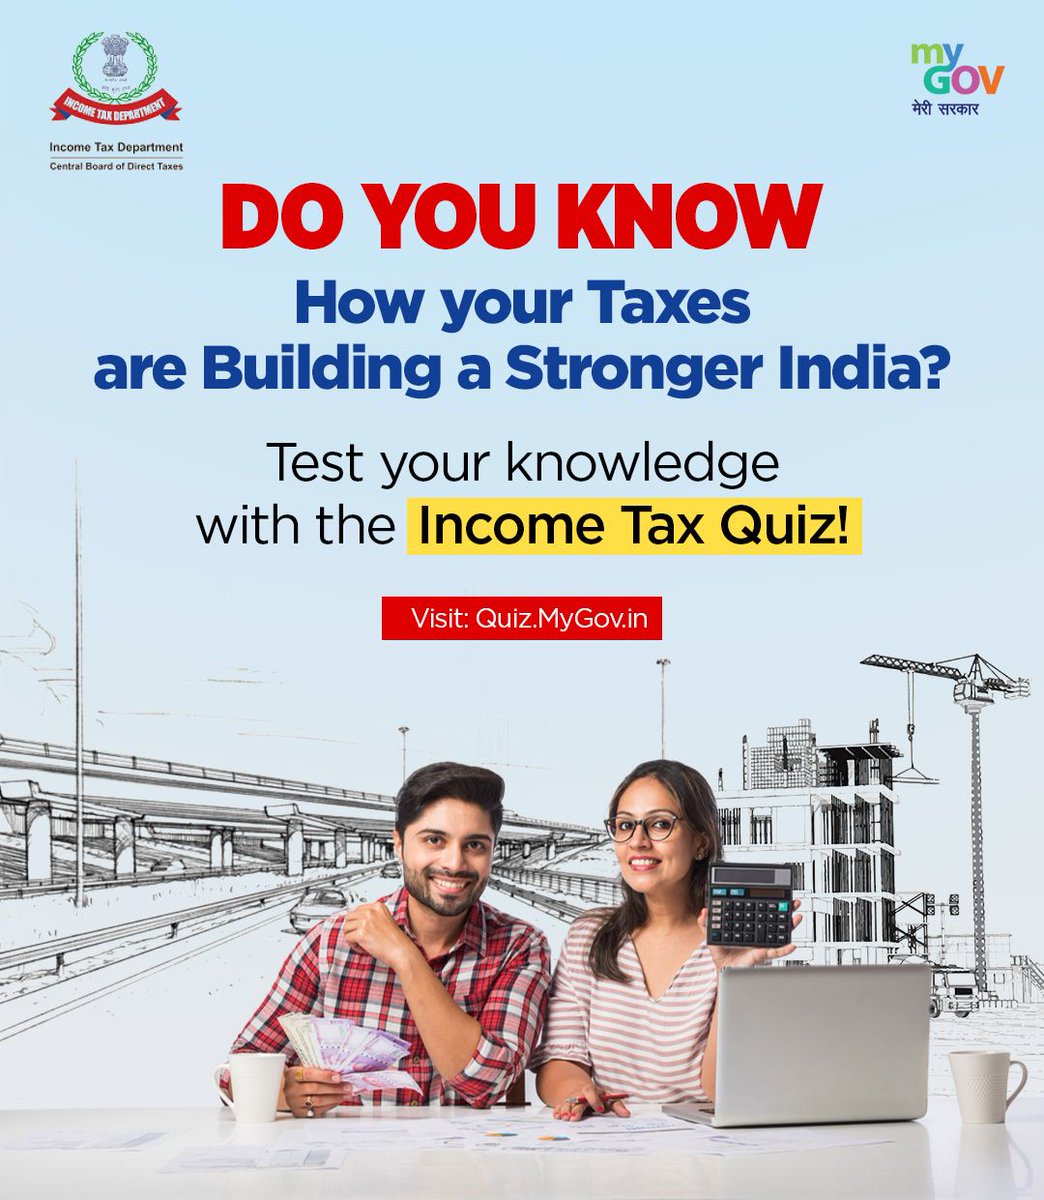 Dive into the Income Tax Quiz on #MyGov to level up your tax knowledge! Let's ensure every citizen has access to vital tax education. Visit: quiz.mygov.in/quiz/income-ta… #NewIndia #IT @IncomeTaxIndia